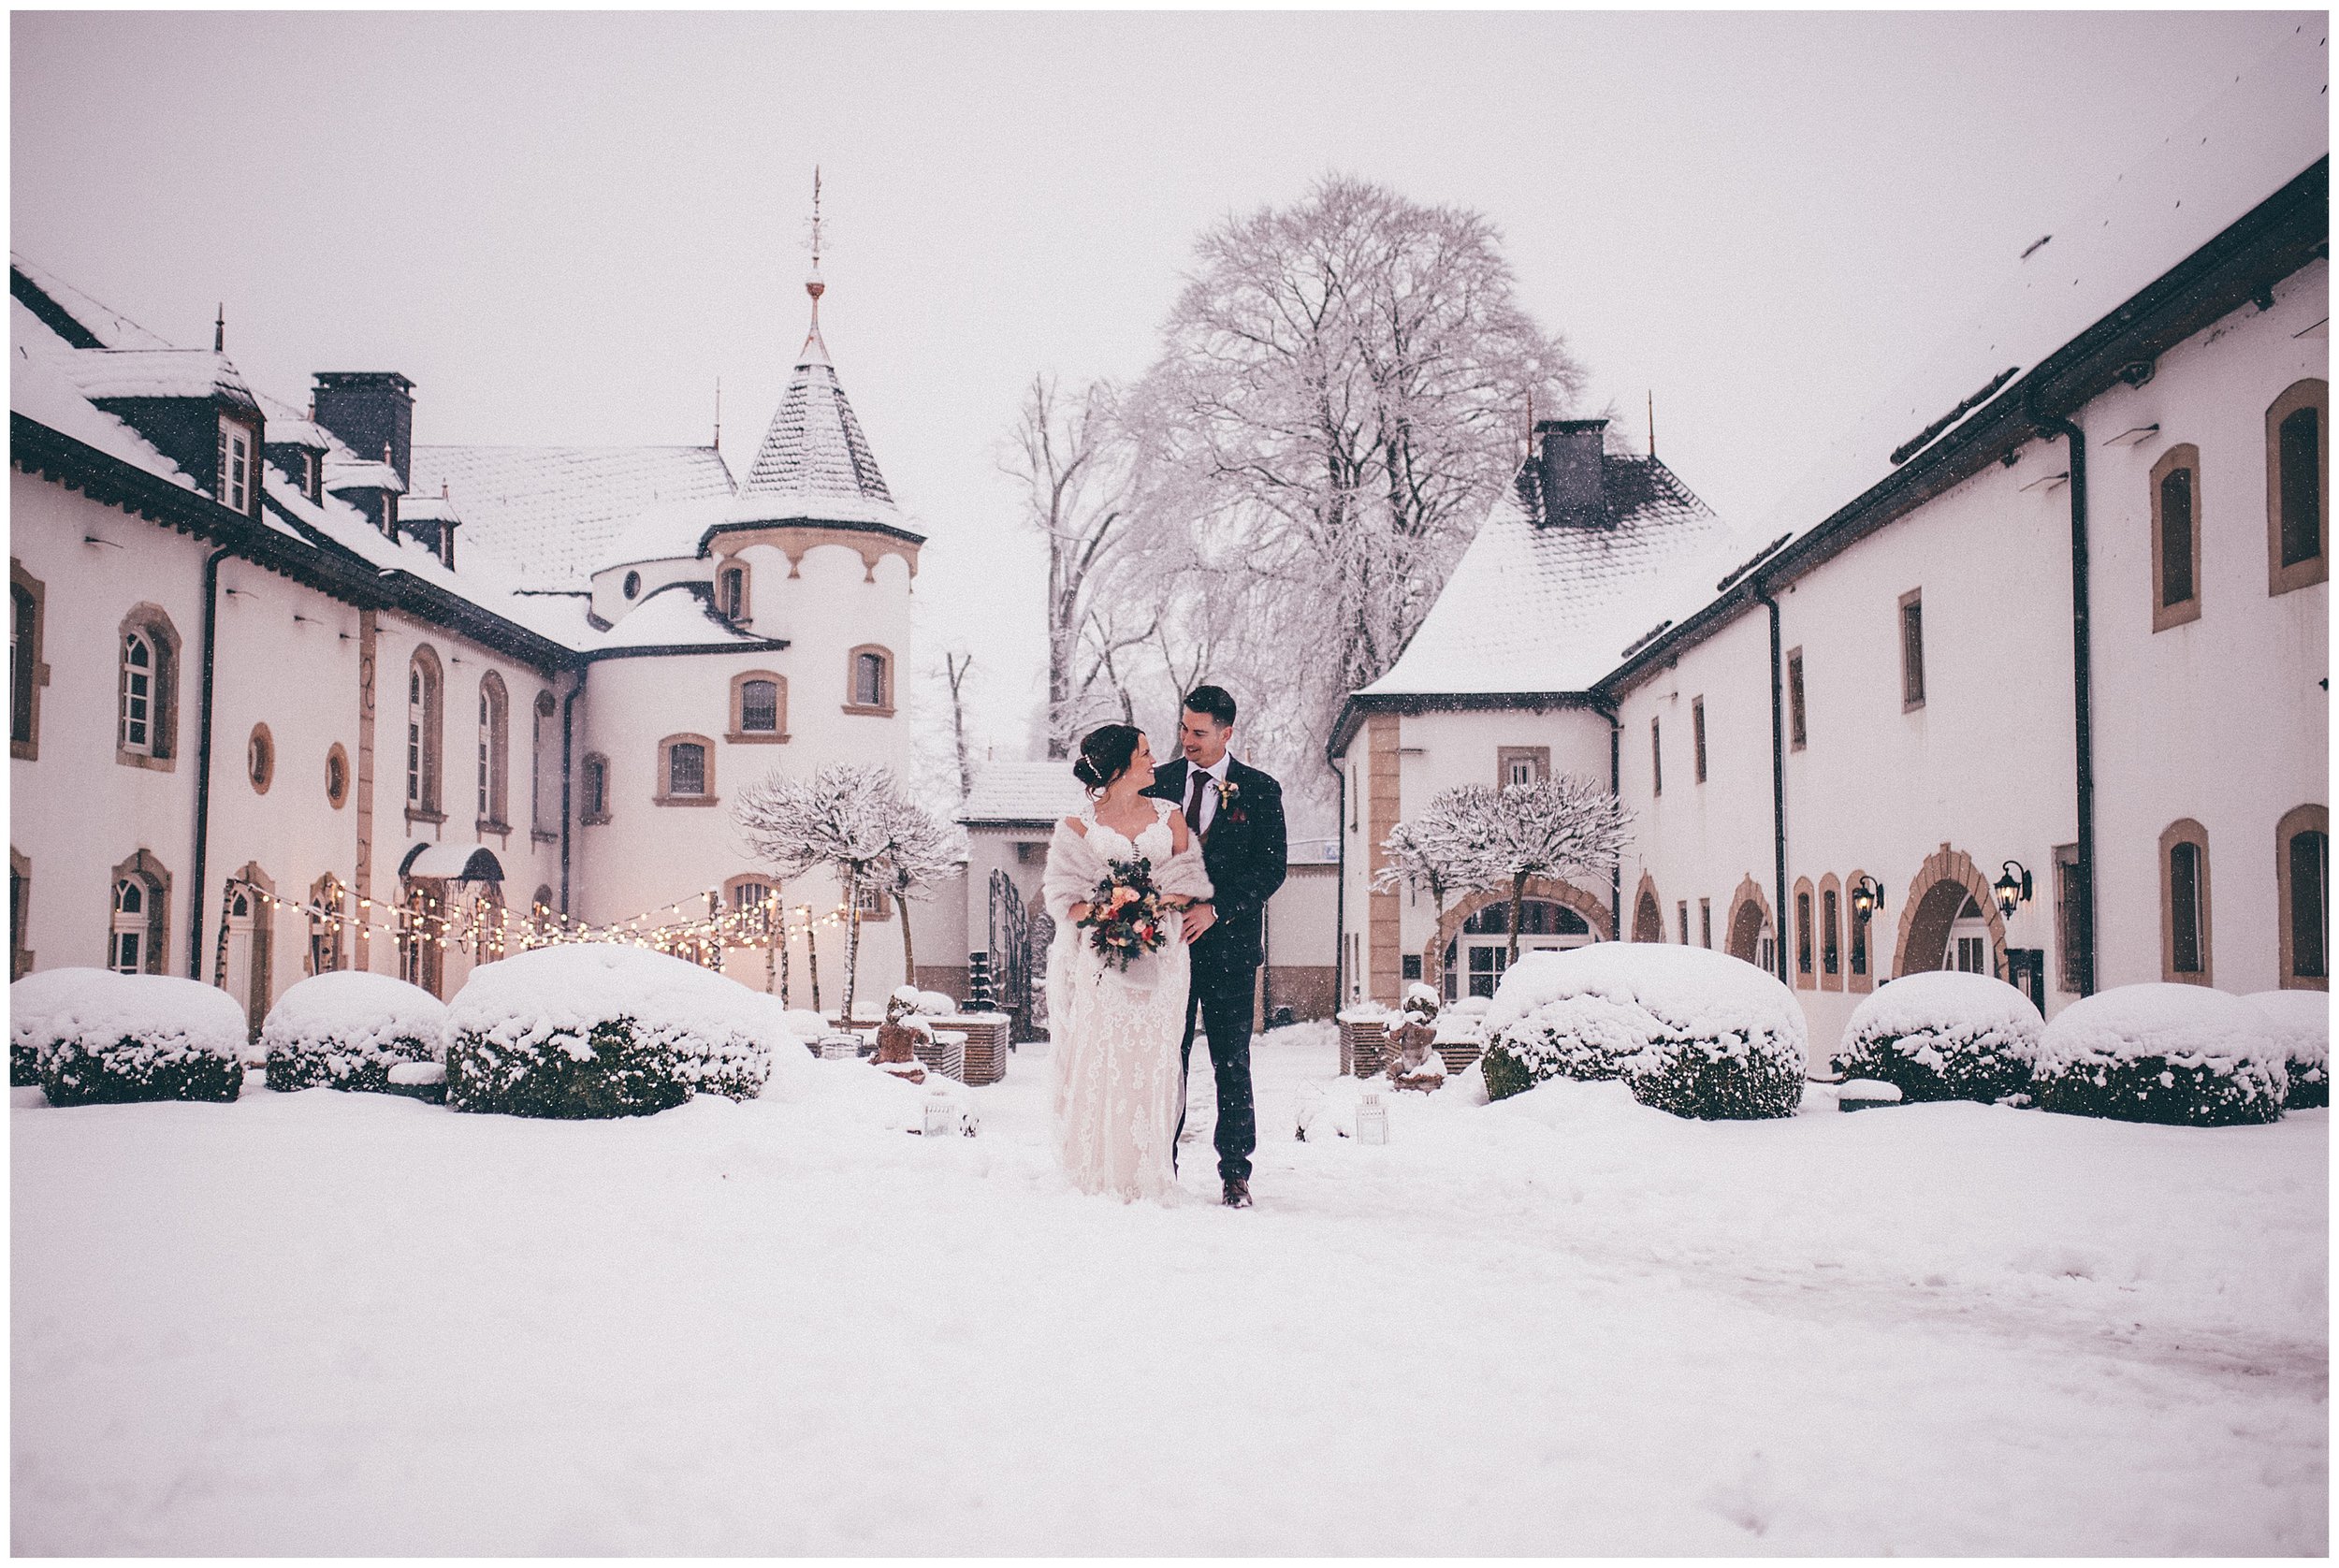 Bride and groom gaze lovingly at each other in the snow at Chateau D'Urspelt in Luxembourg